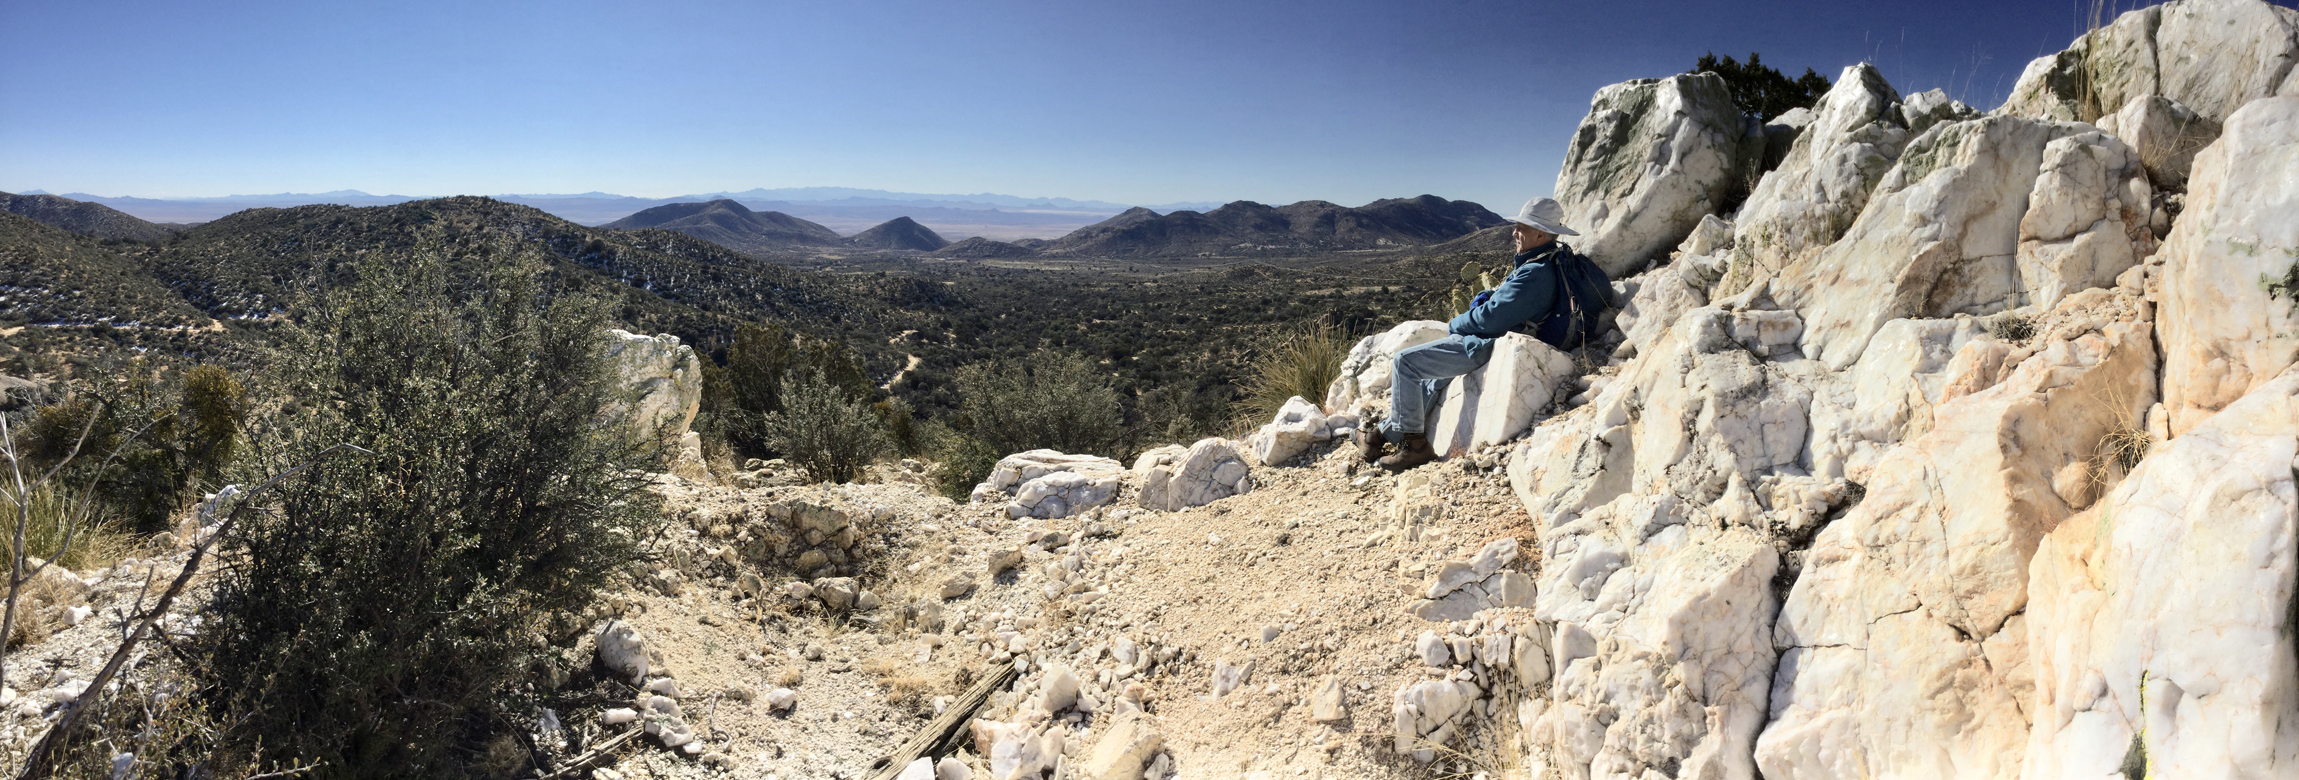 panorama from the top of the quartz mountain